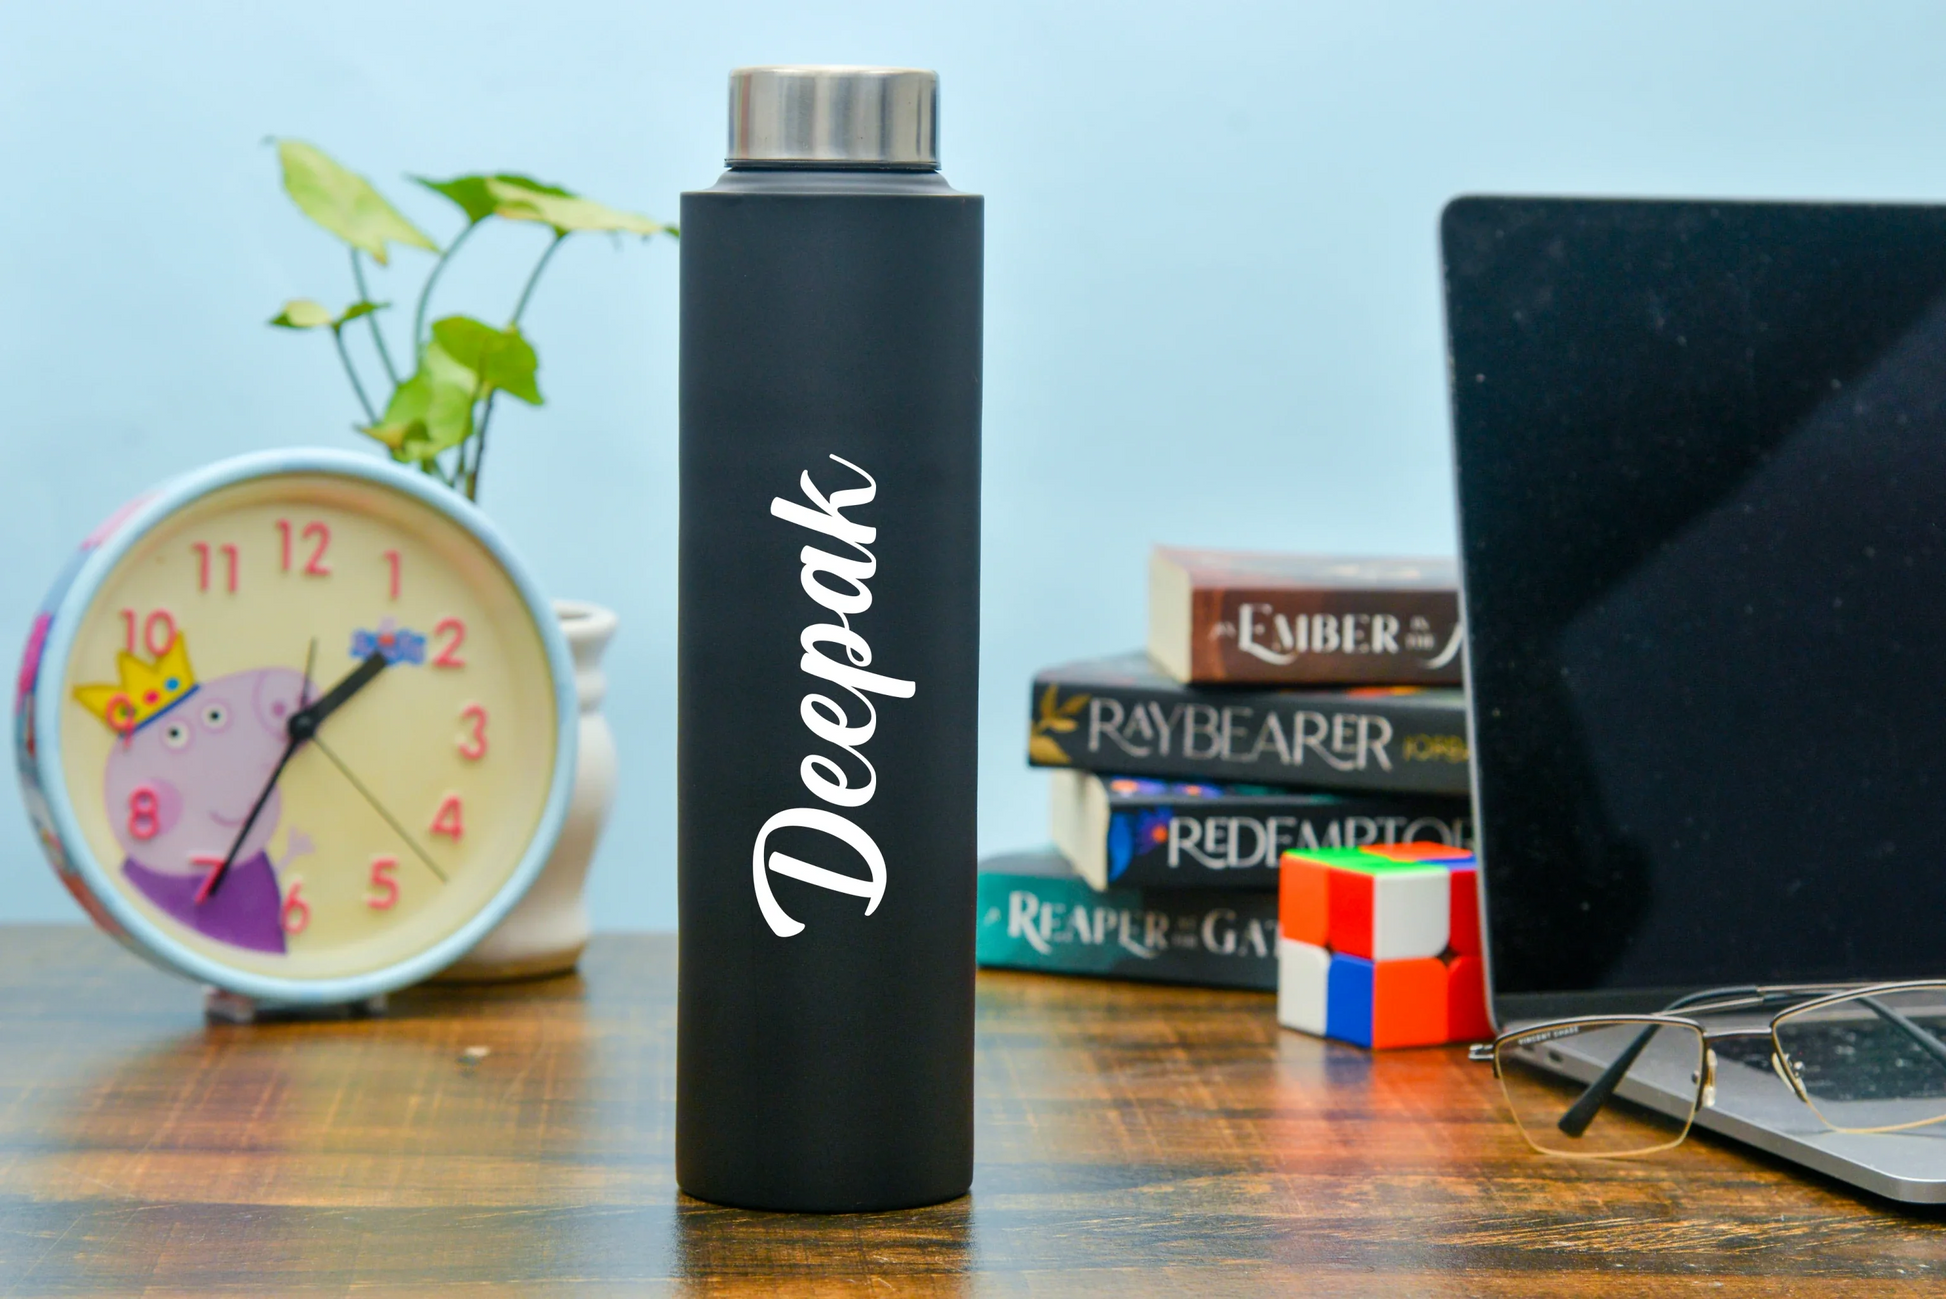 Our sleek and modern stainless steel bottle is the perfect accessory for anyone who loves to stay hydrated on the go. Customize it with your own design for a unique touch.